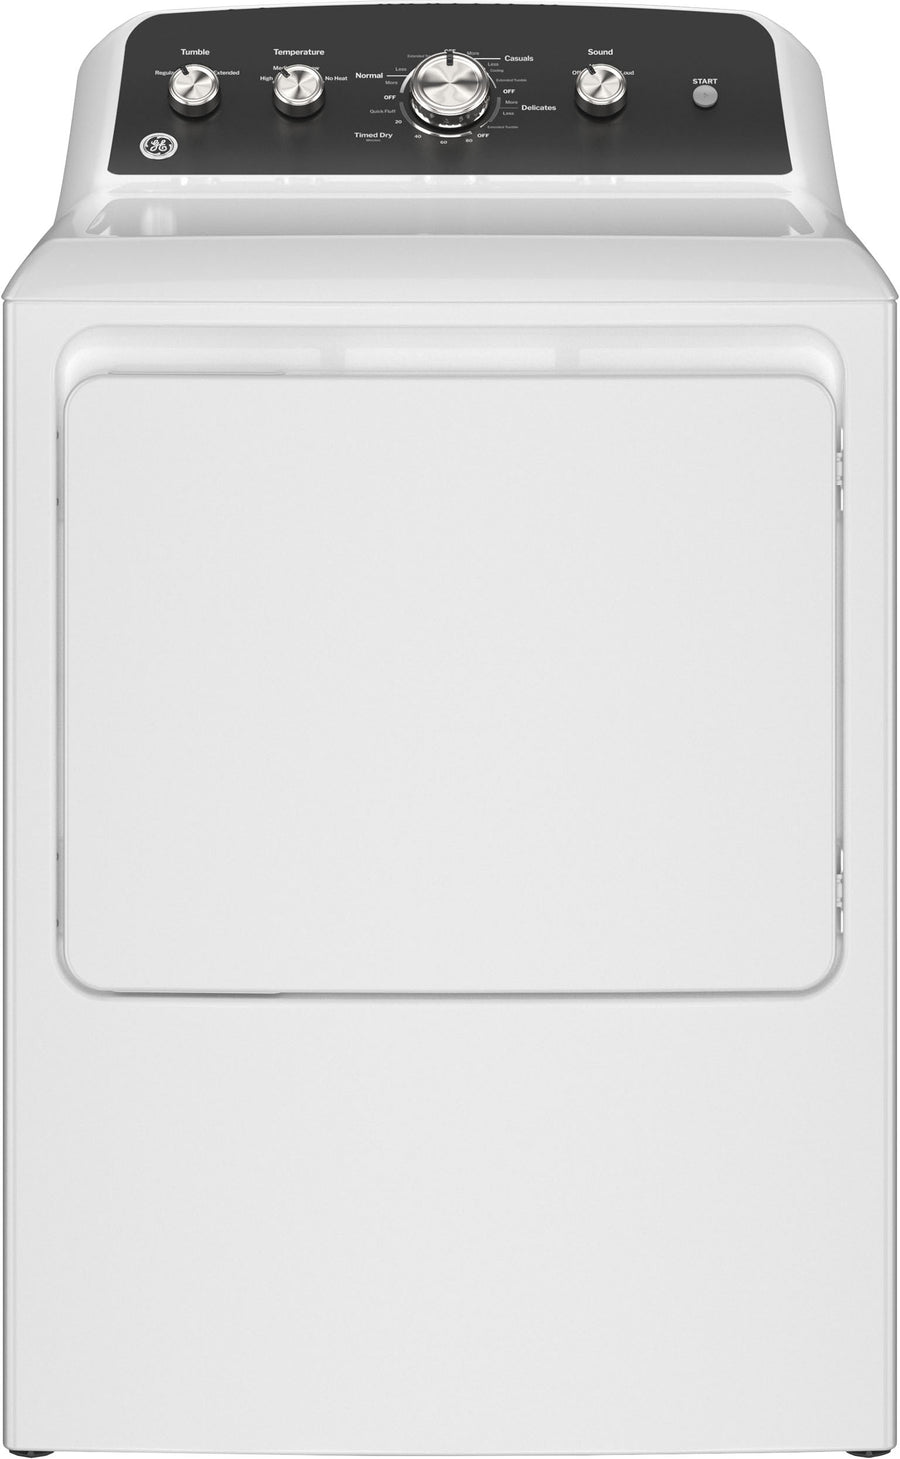 GE - 7.2 Cu. Ft. Electric Dryer with Long Venting up to 120 Ft. - White with Black_0